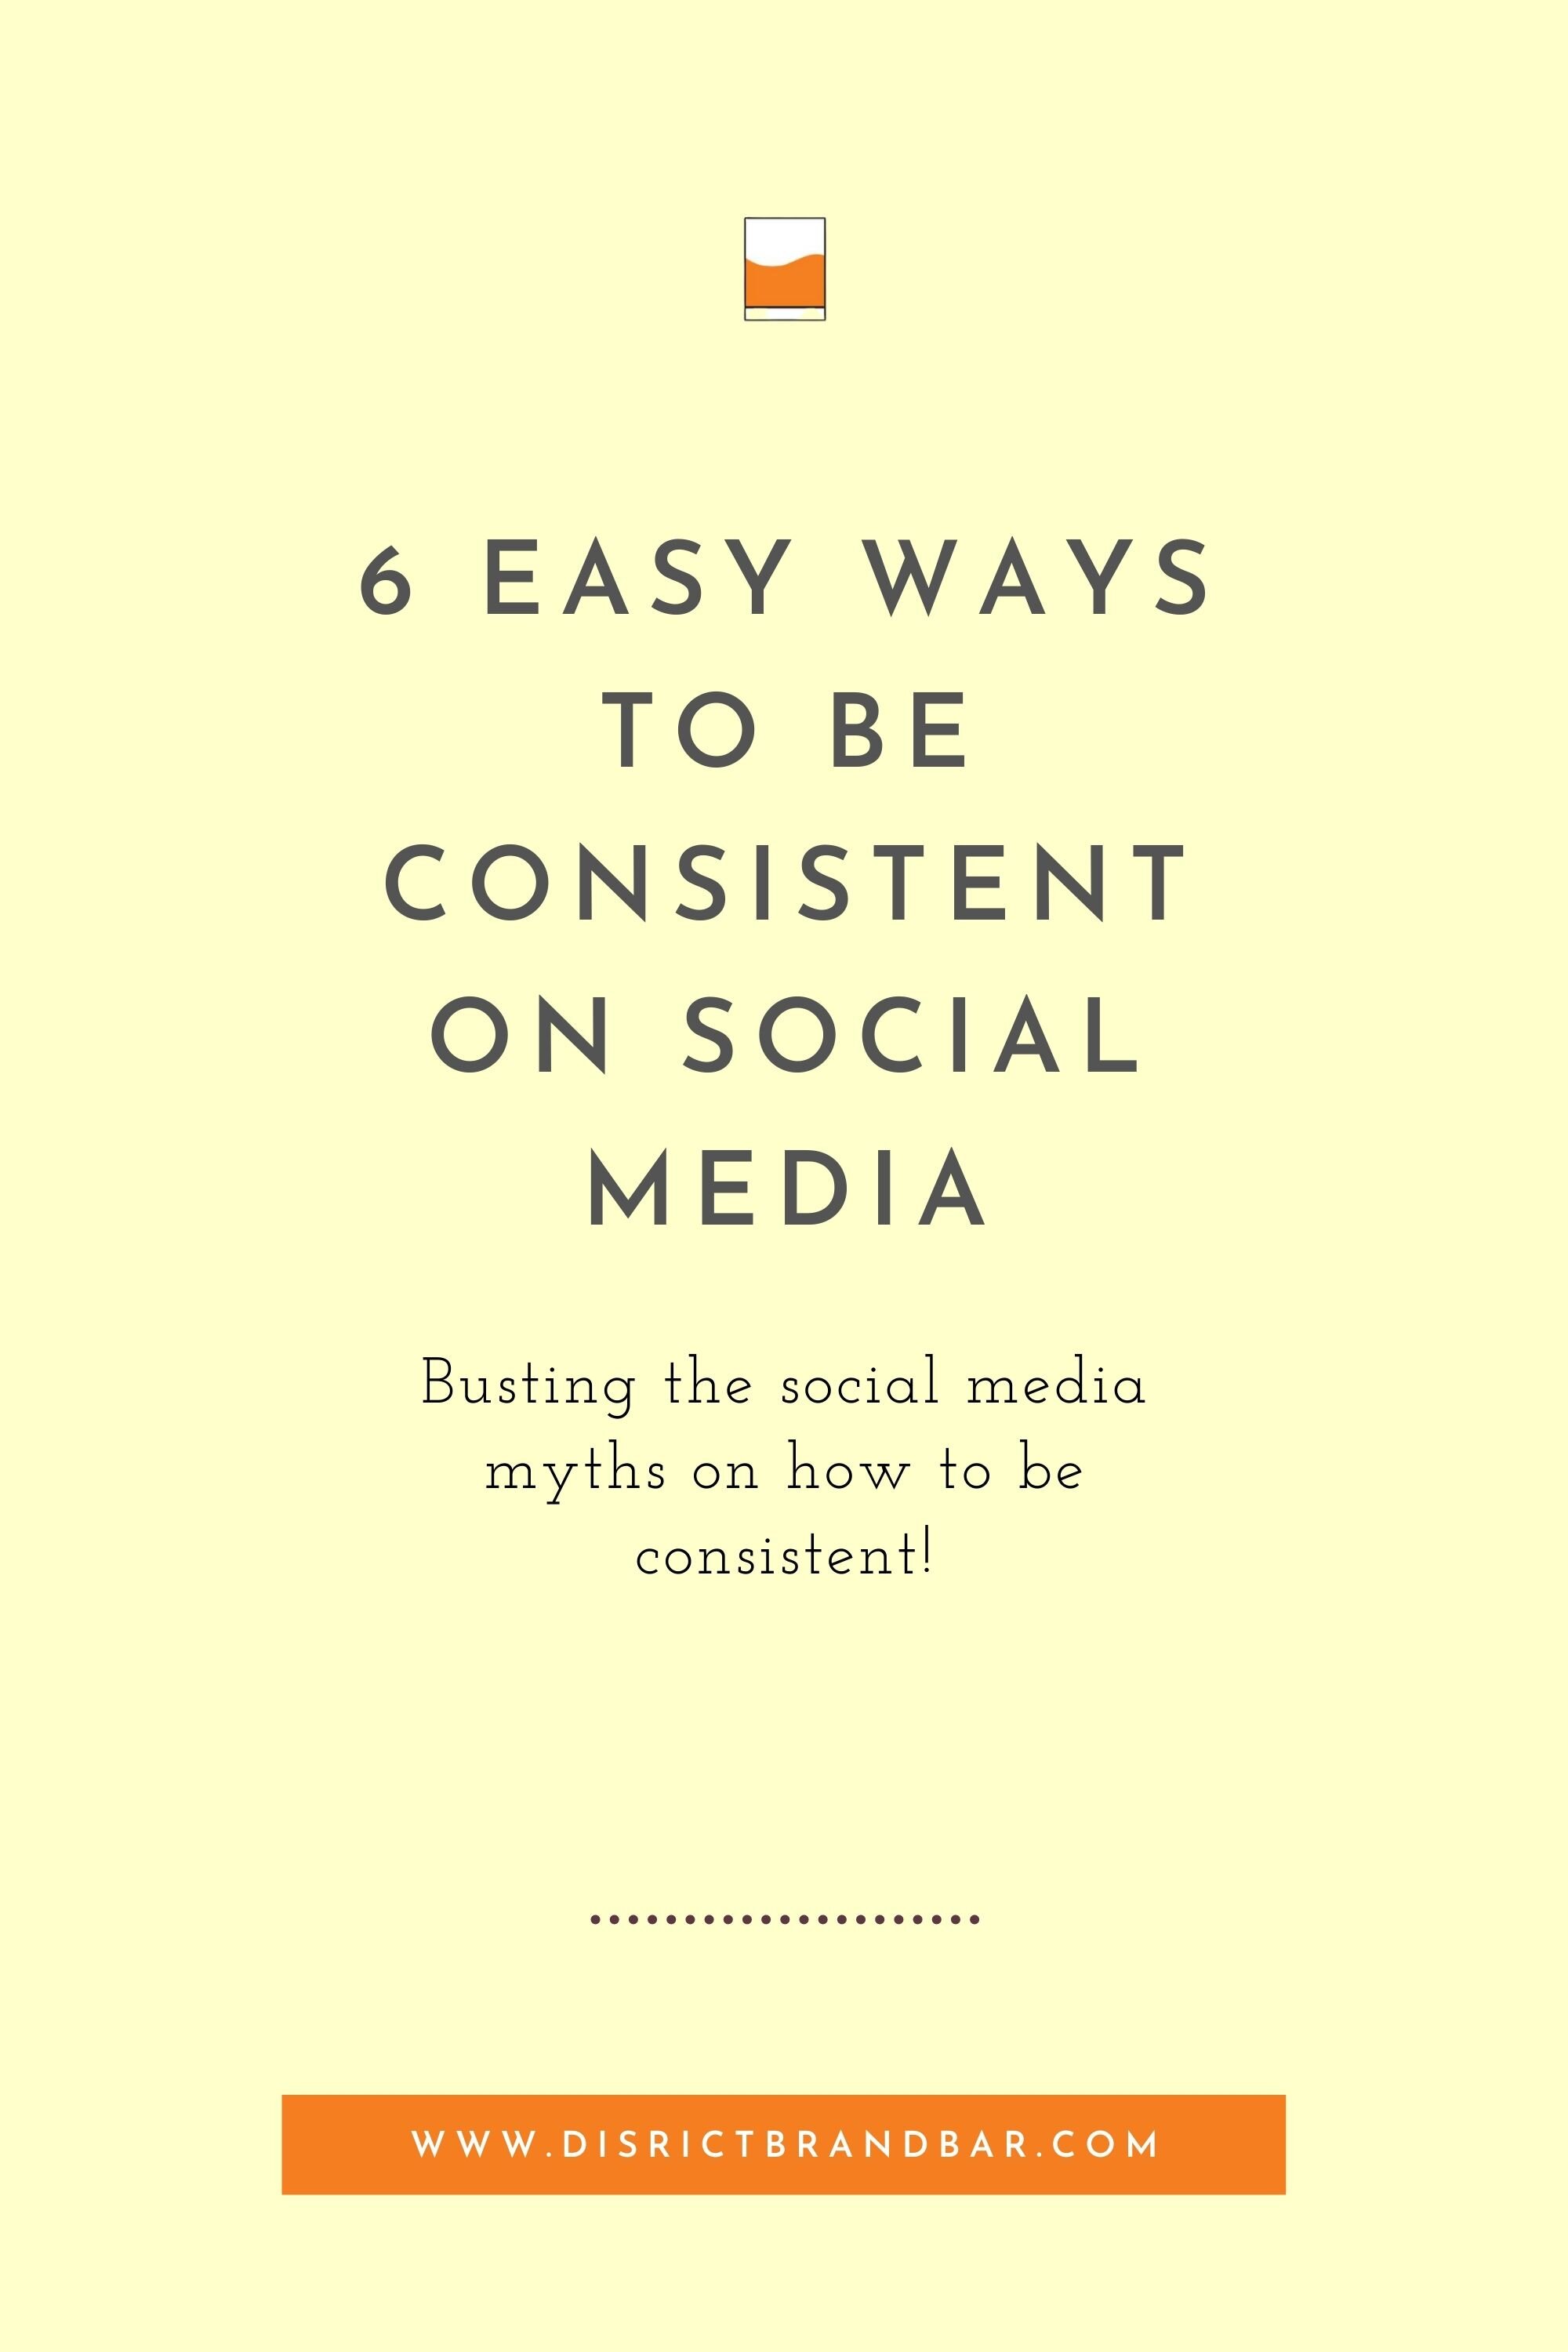 6 Easy Ways to Be Consistent on Social Media